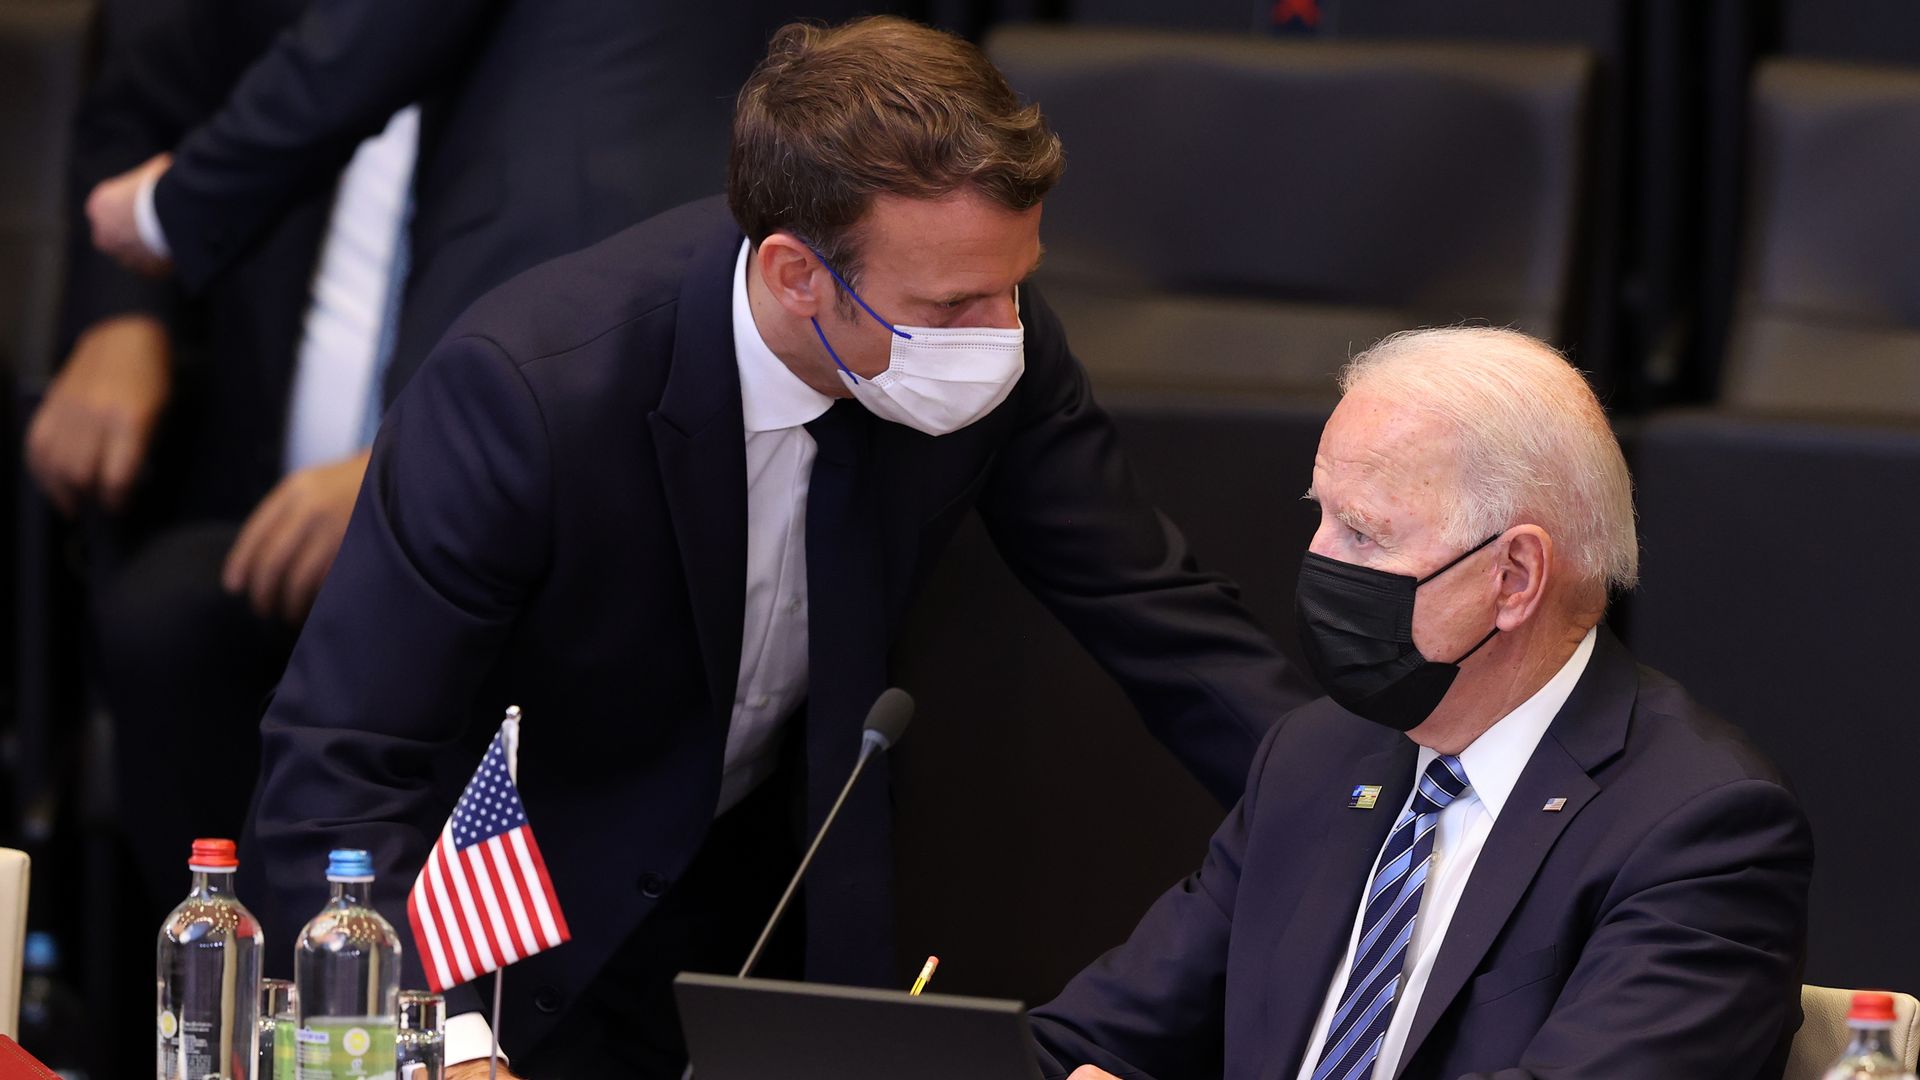 President Joe Biden (R) and French President Emmanuel Macron (L) have a conversation ahead of the NATO summit  in Brussels, on June 14, 2021.